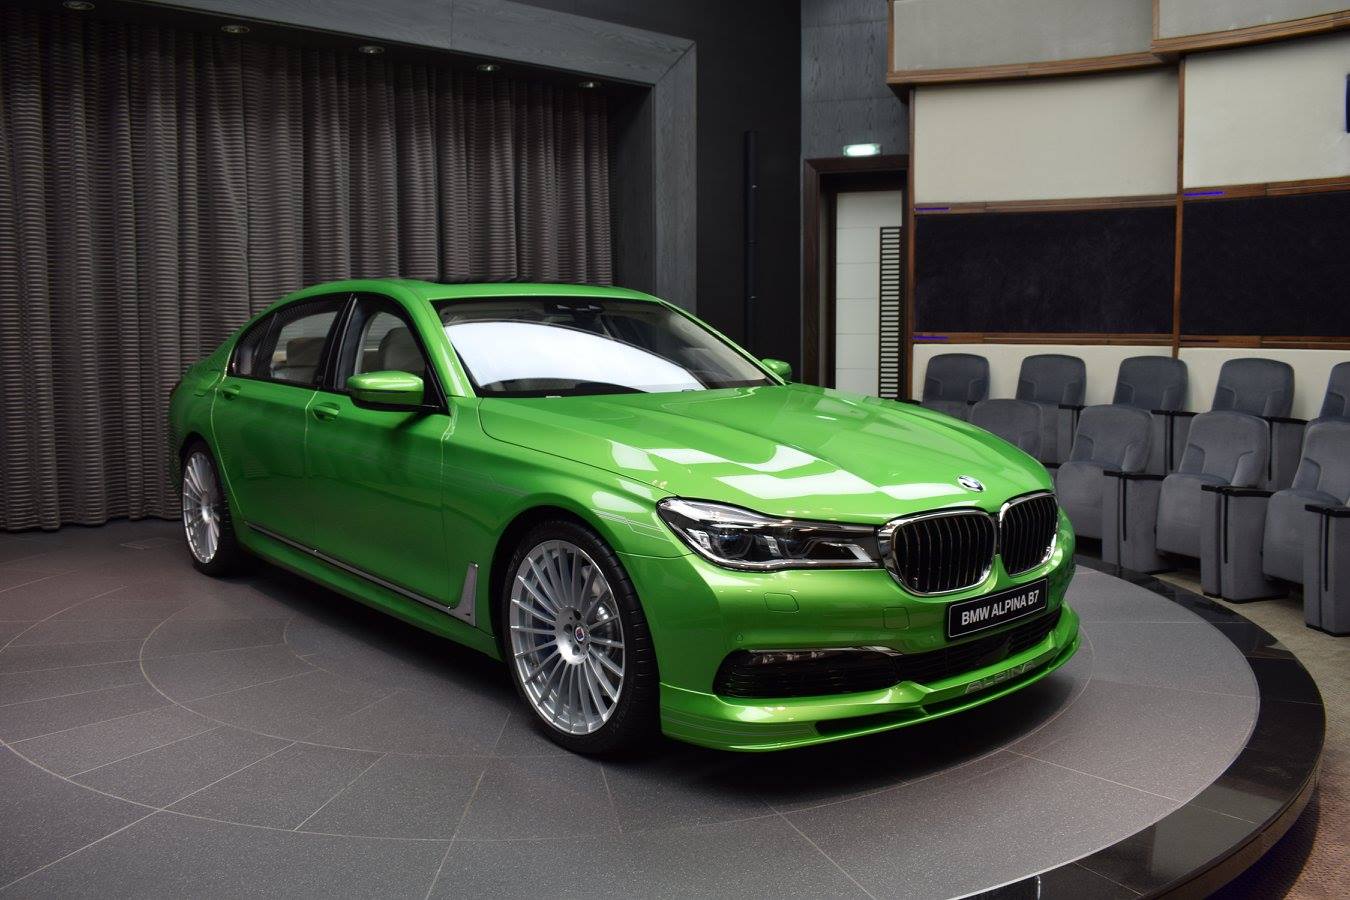 alpina-b7-painted-in-java-green-metallic-gets-all-the-attention-112821_1.jpg